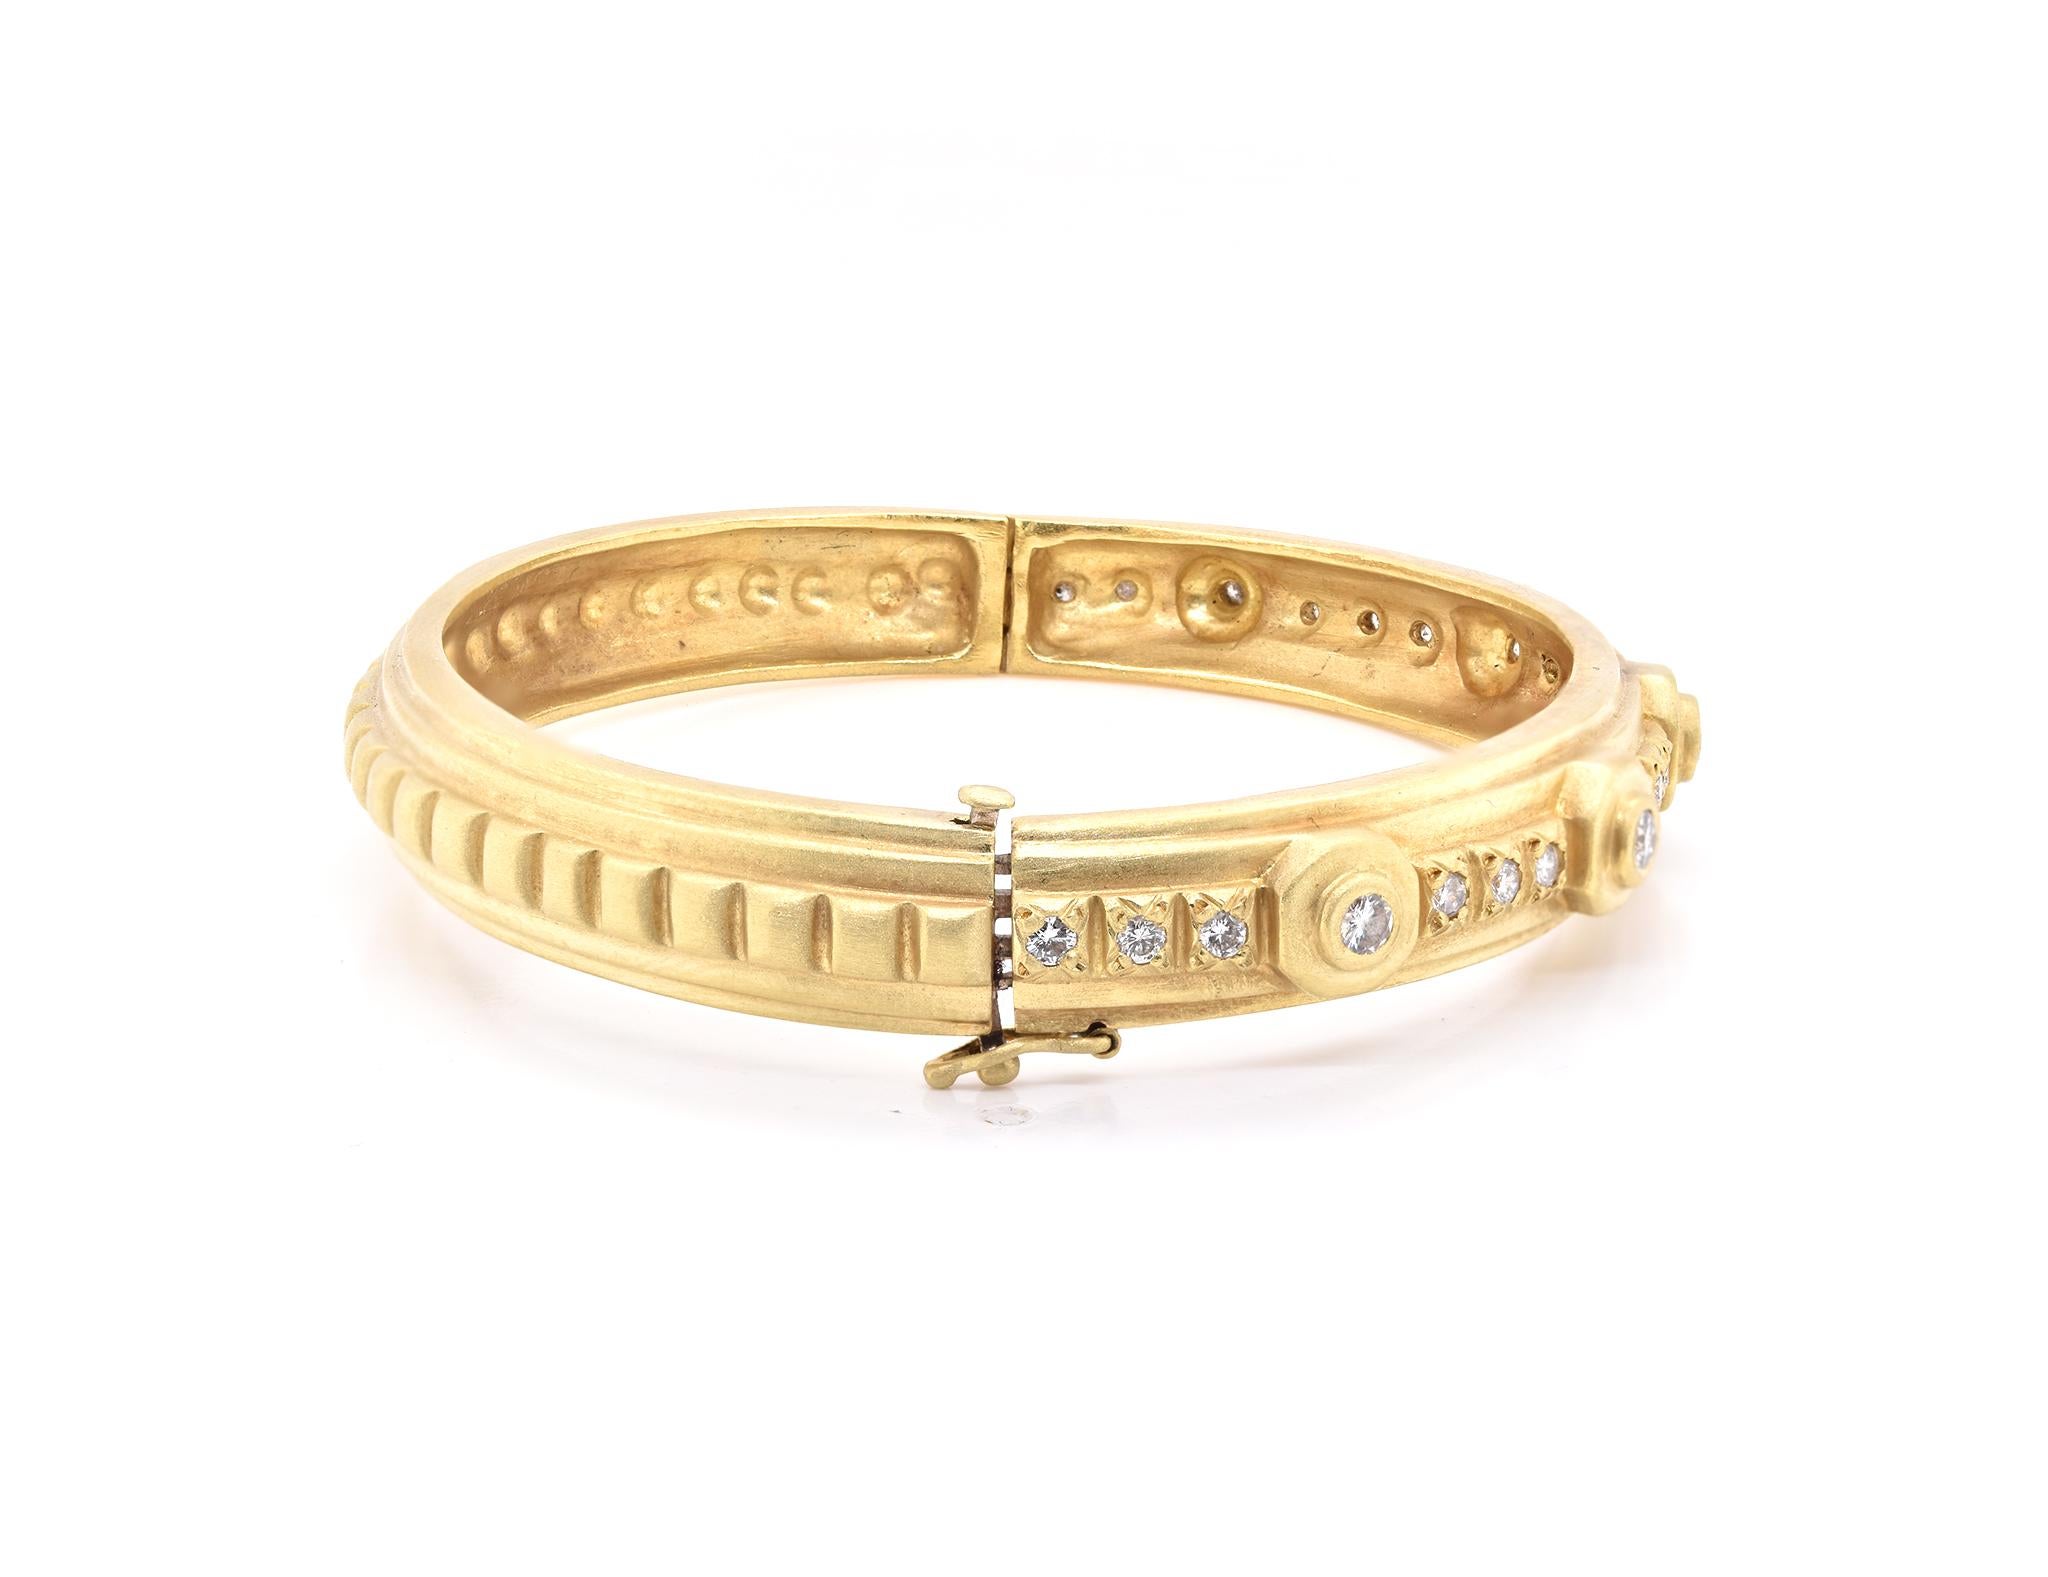 Designer: Doris Panos
Material: 18K yellow gold
Diamonds: 22 round brilliant cut = .64cttw
Color: G
Clarity: VS2
Weight: 39.93 grams
Measurement: bracelet will fit up to a 7-inch wrist
